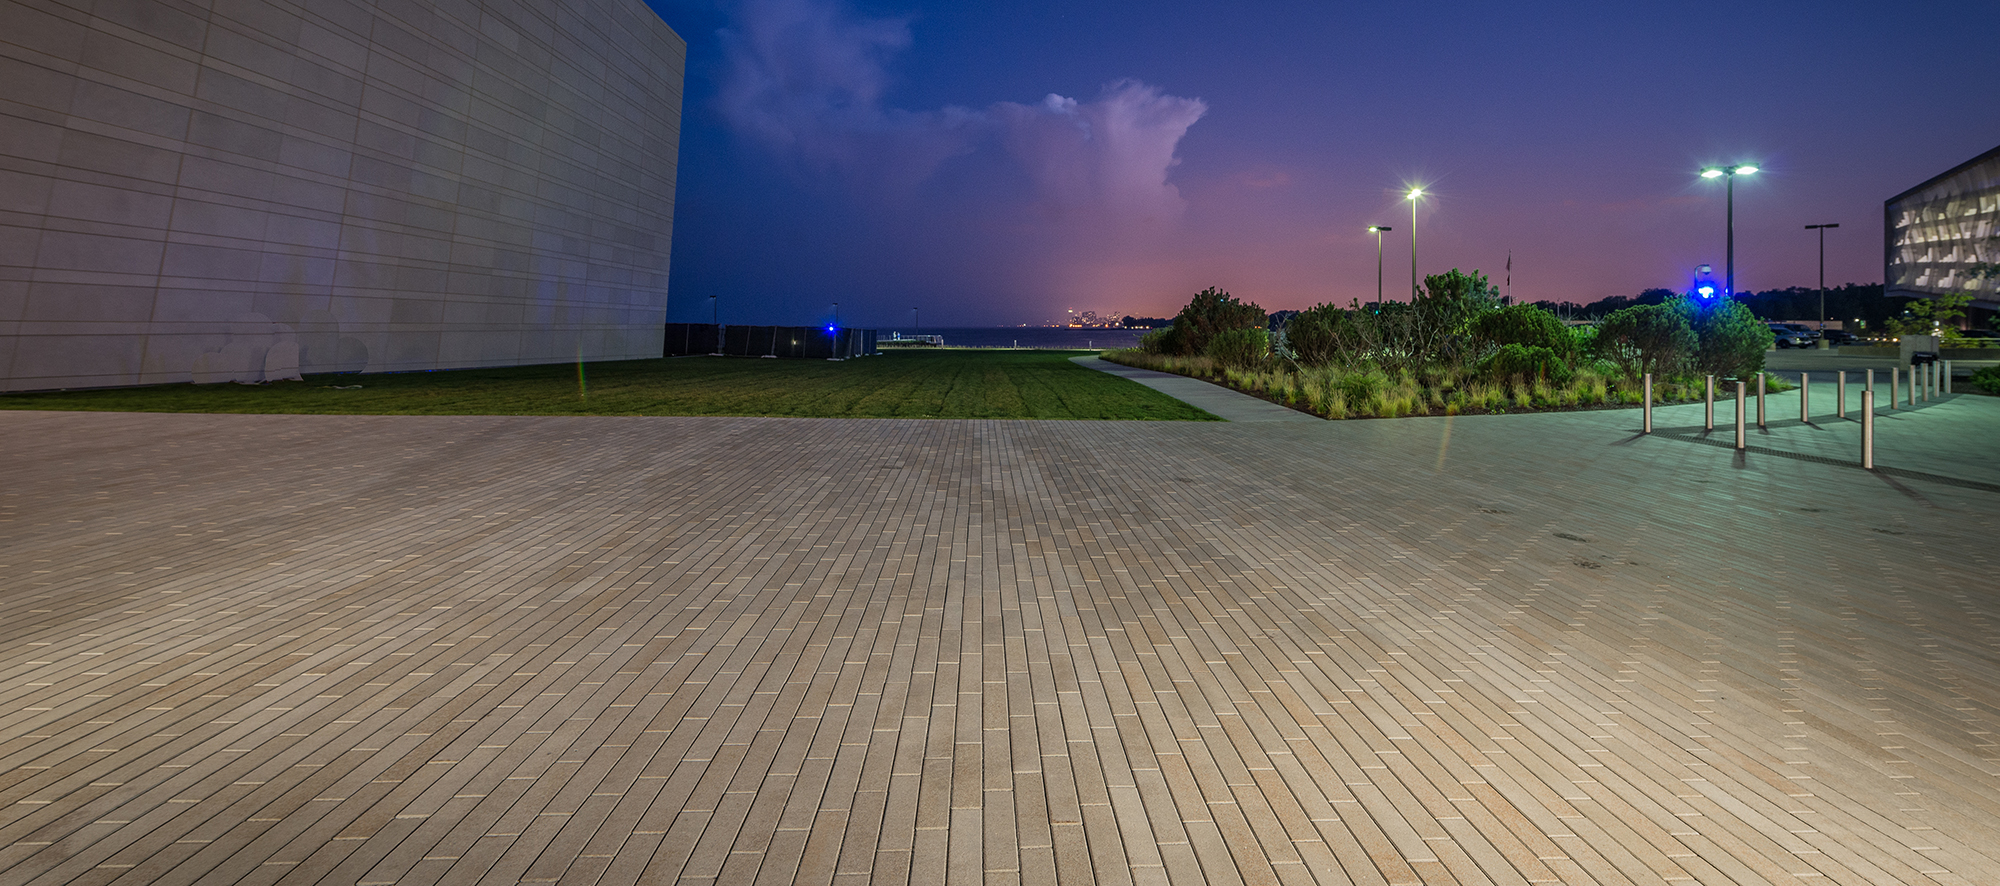 A large pedestrian area of Promenade plank pavers bordered by landscaping and a parking lot is lit by streetlights and the purple evening sky.